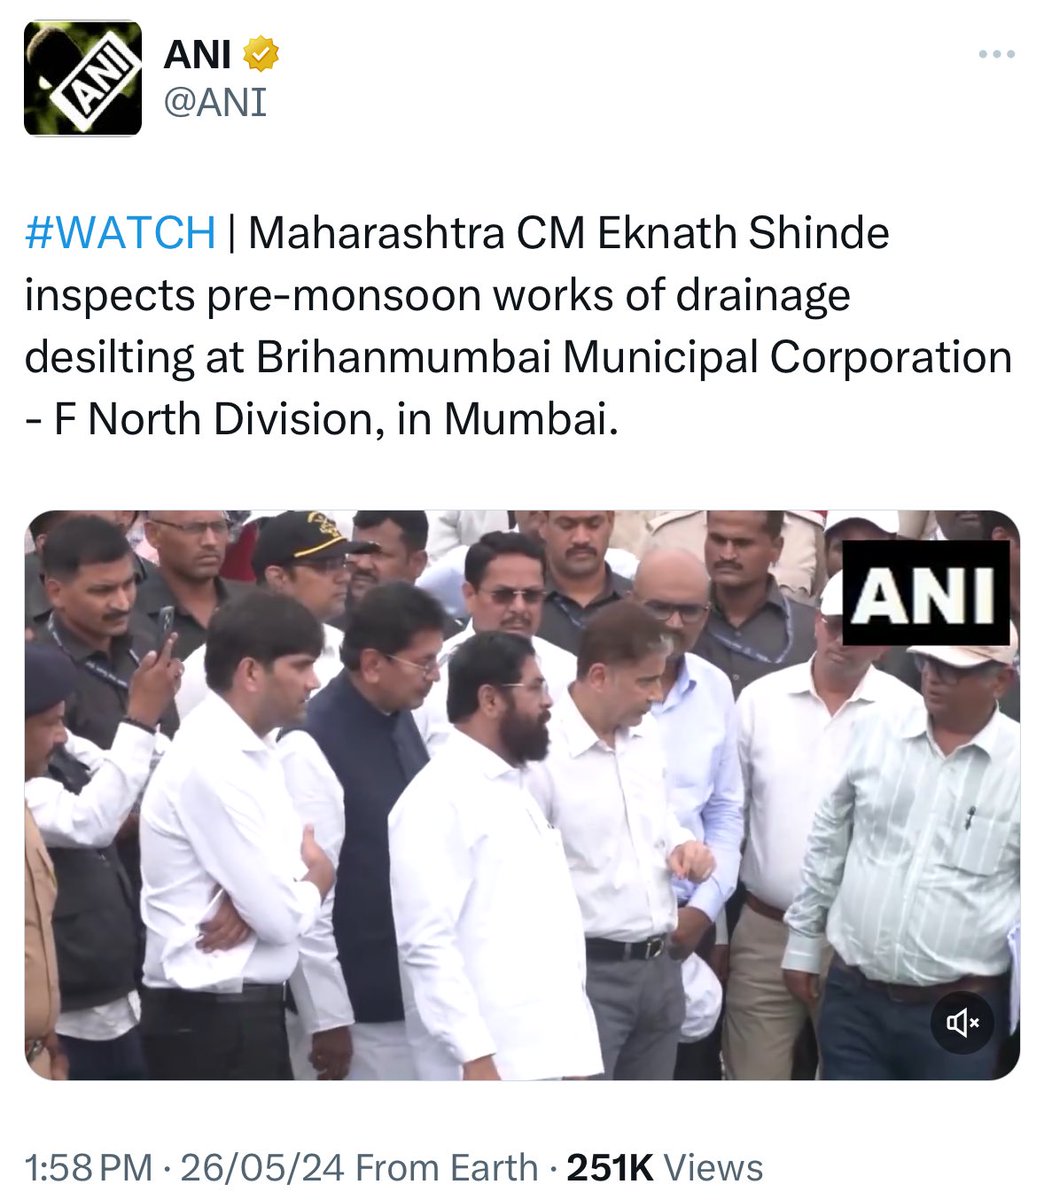 Elections in Maharashtra is over:

Uddhav and Aditya are out of India for vacation.

CM Shinde is on ground inspecting pre-monsoon work with BMC.

(Uddhav is MLC and Aditya is MLA)